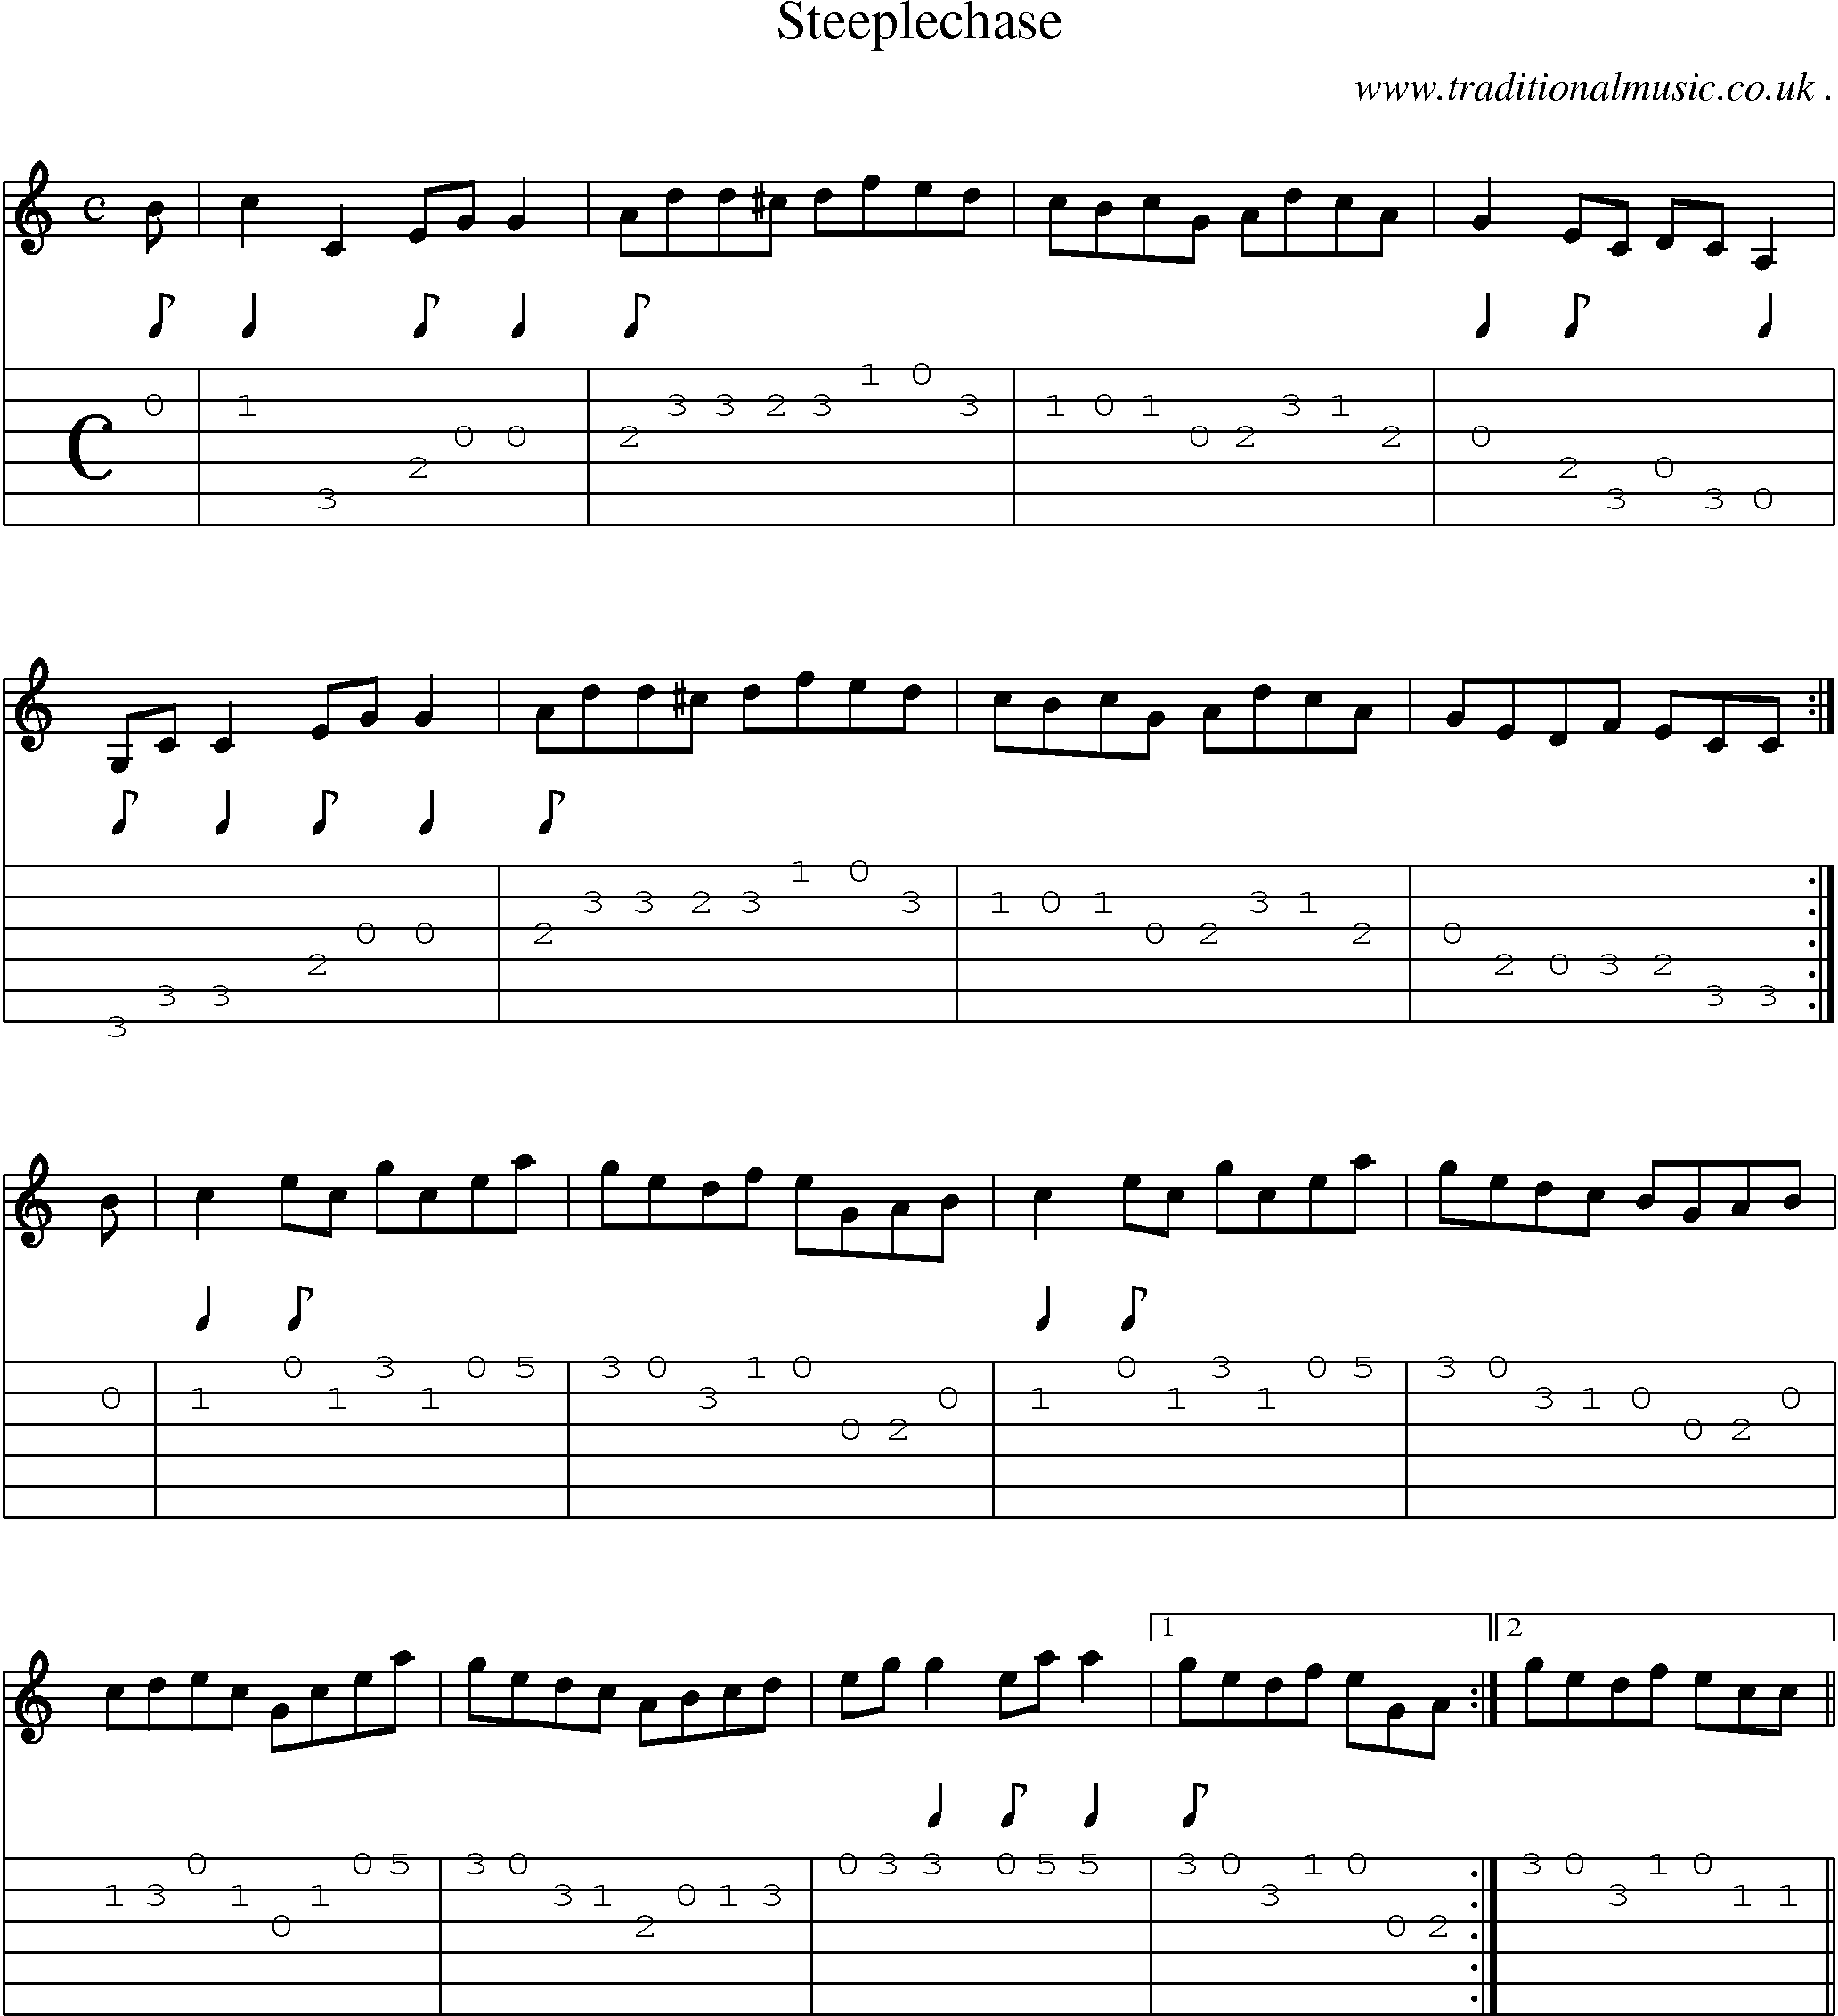 Sheet-Music and Guitar Tabs for Steeplechase